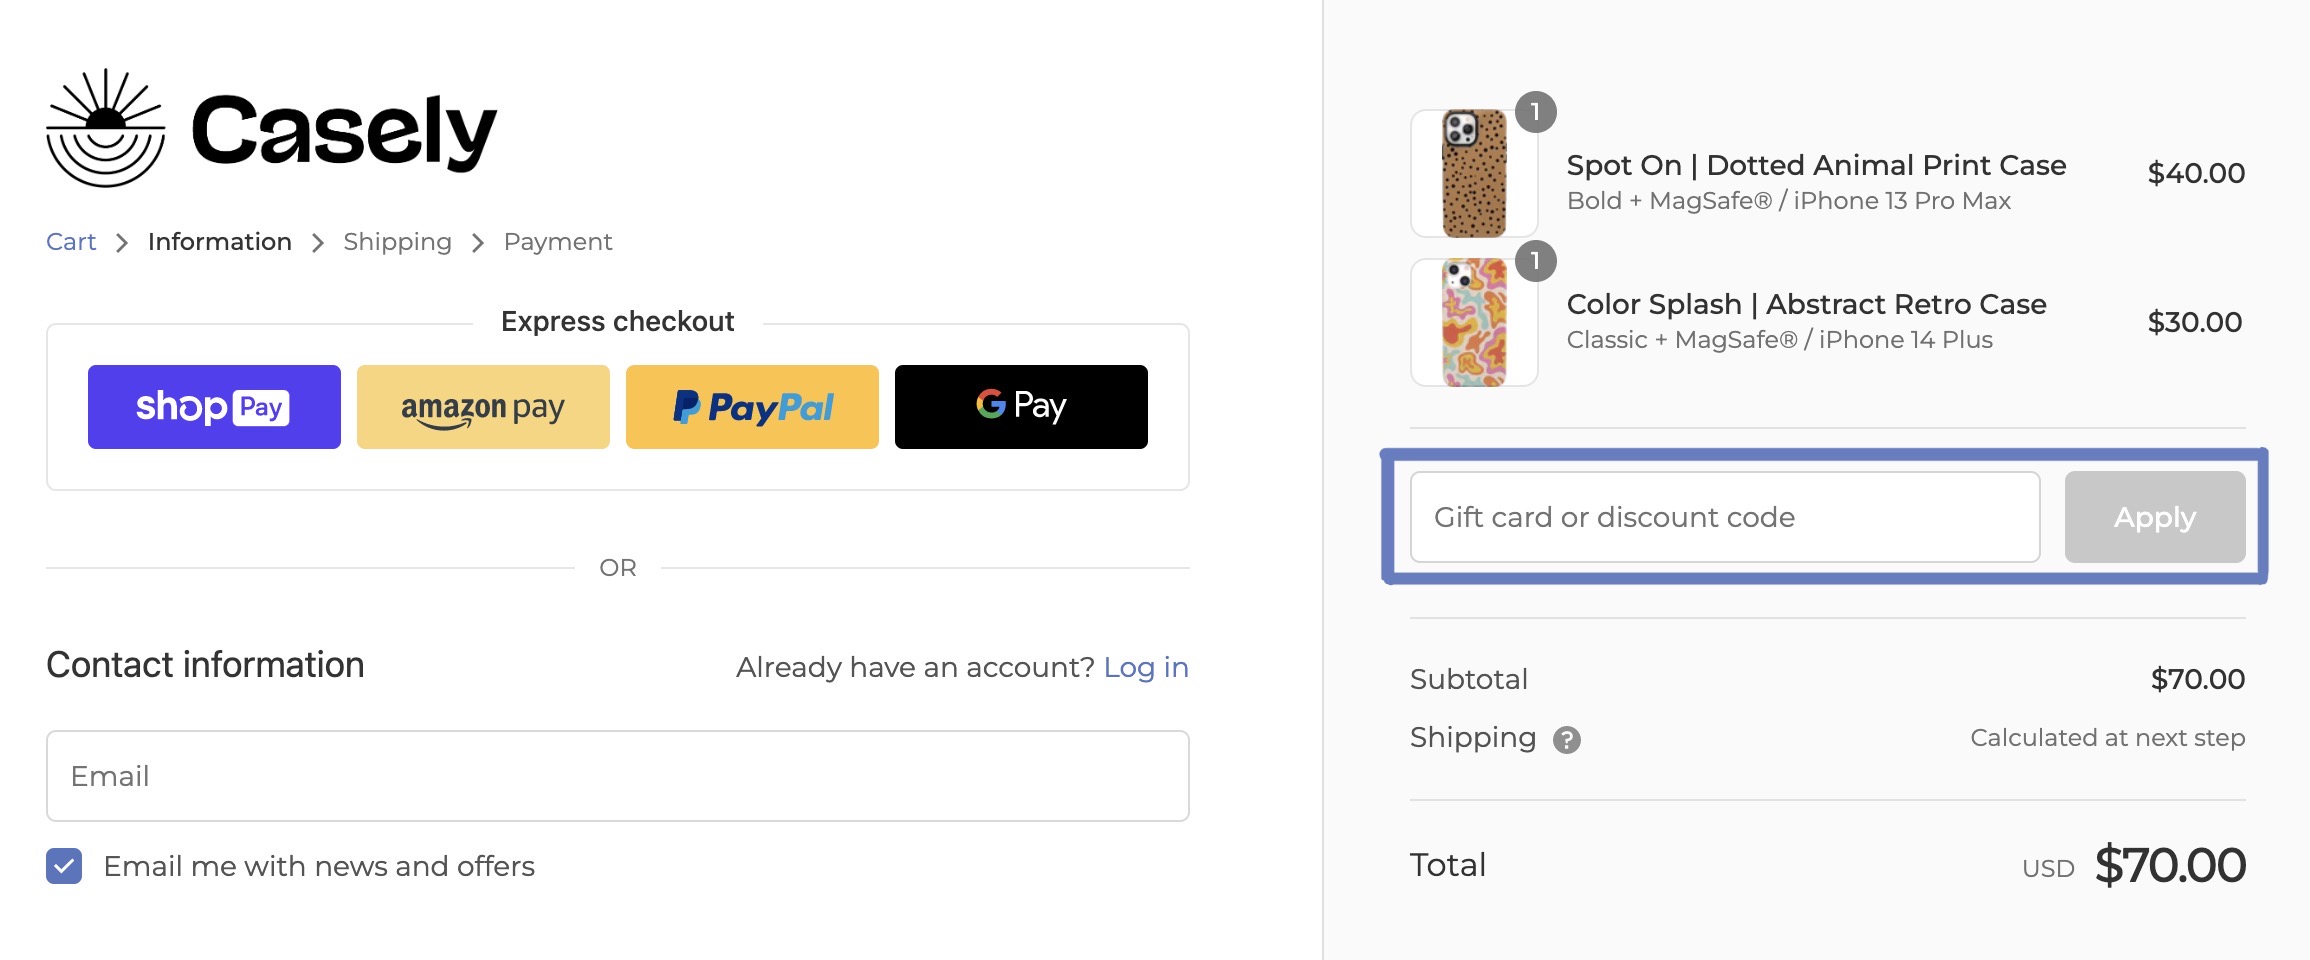 Where do I apply a promo code or gift card? CASELY Frequently Asked